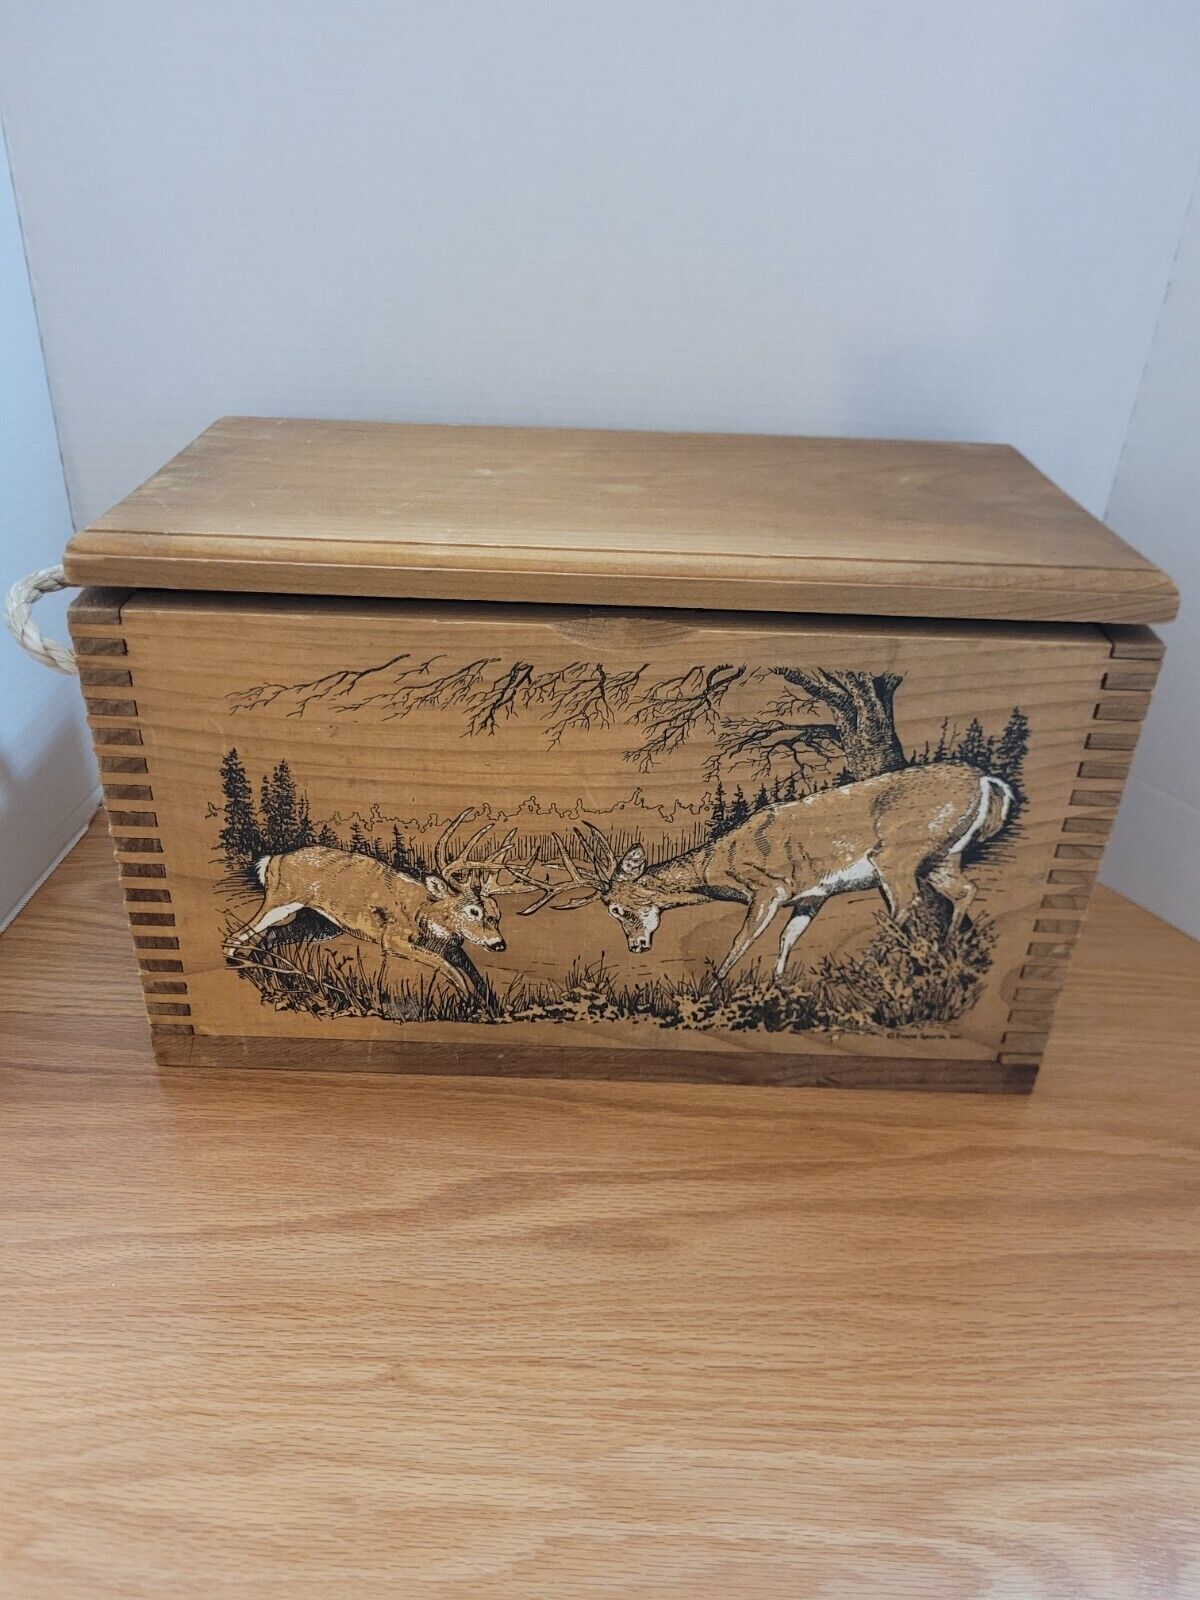 Evan Sports Bucks Fighting Dovetailed Wood Box handcrafted by Evans Sports